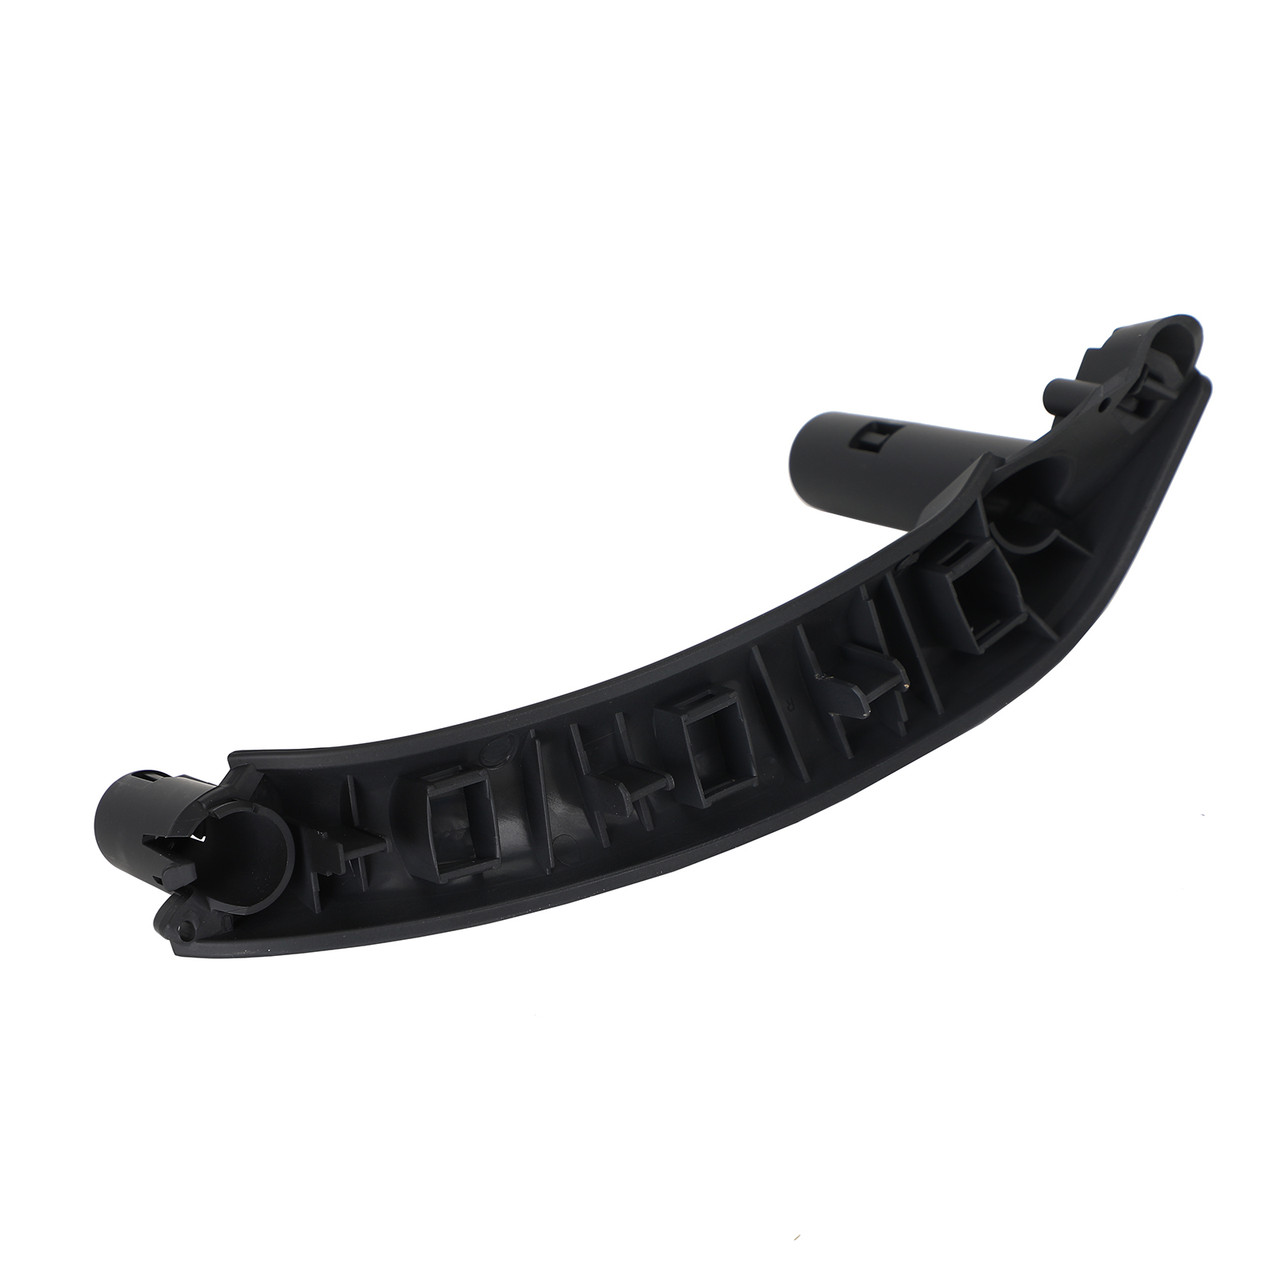 Right Door Inner Handle Pull Trim Fit for BMW X3 F25 X4 F26 11-17